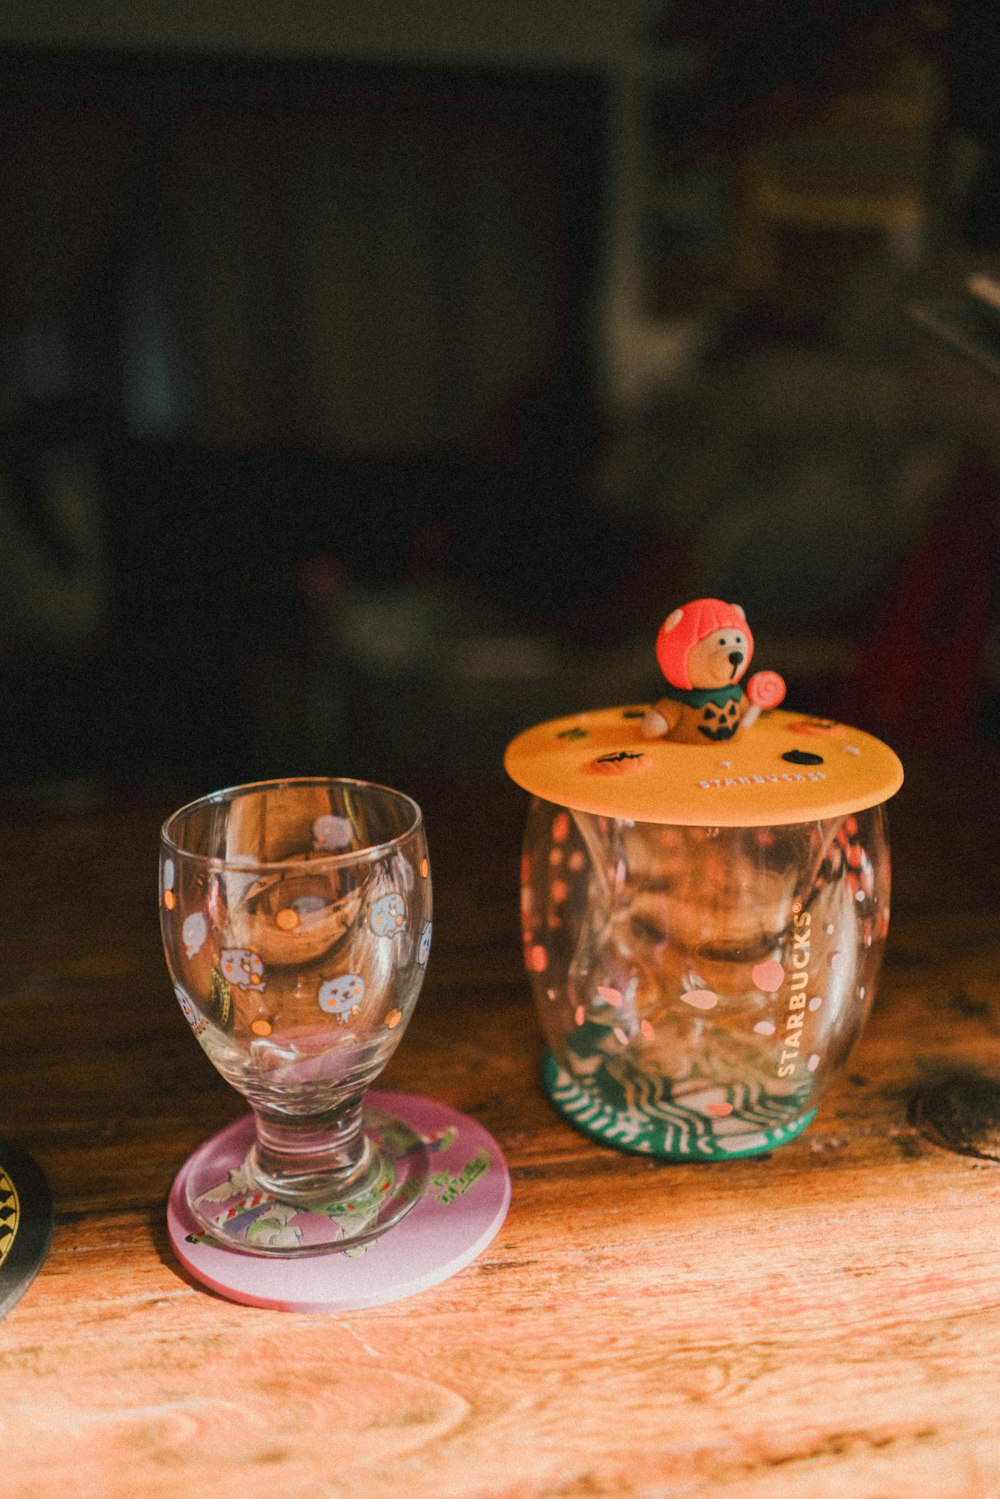 a glass cup and a glass container on a table